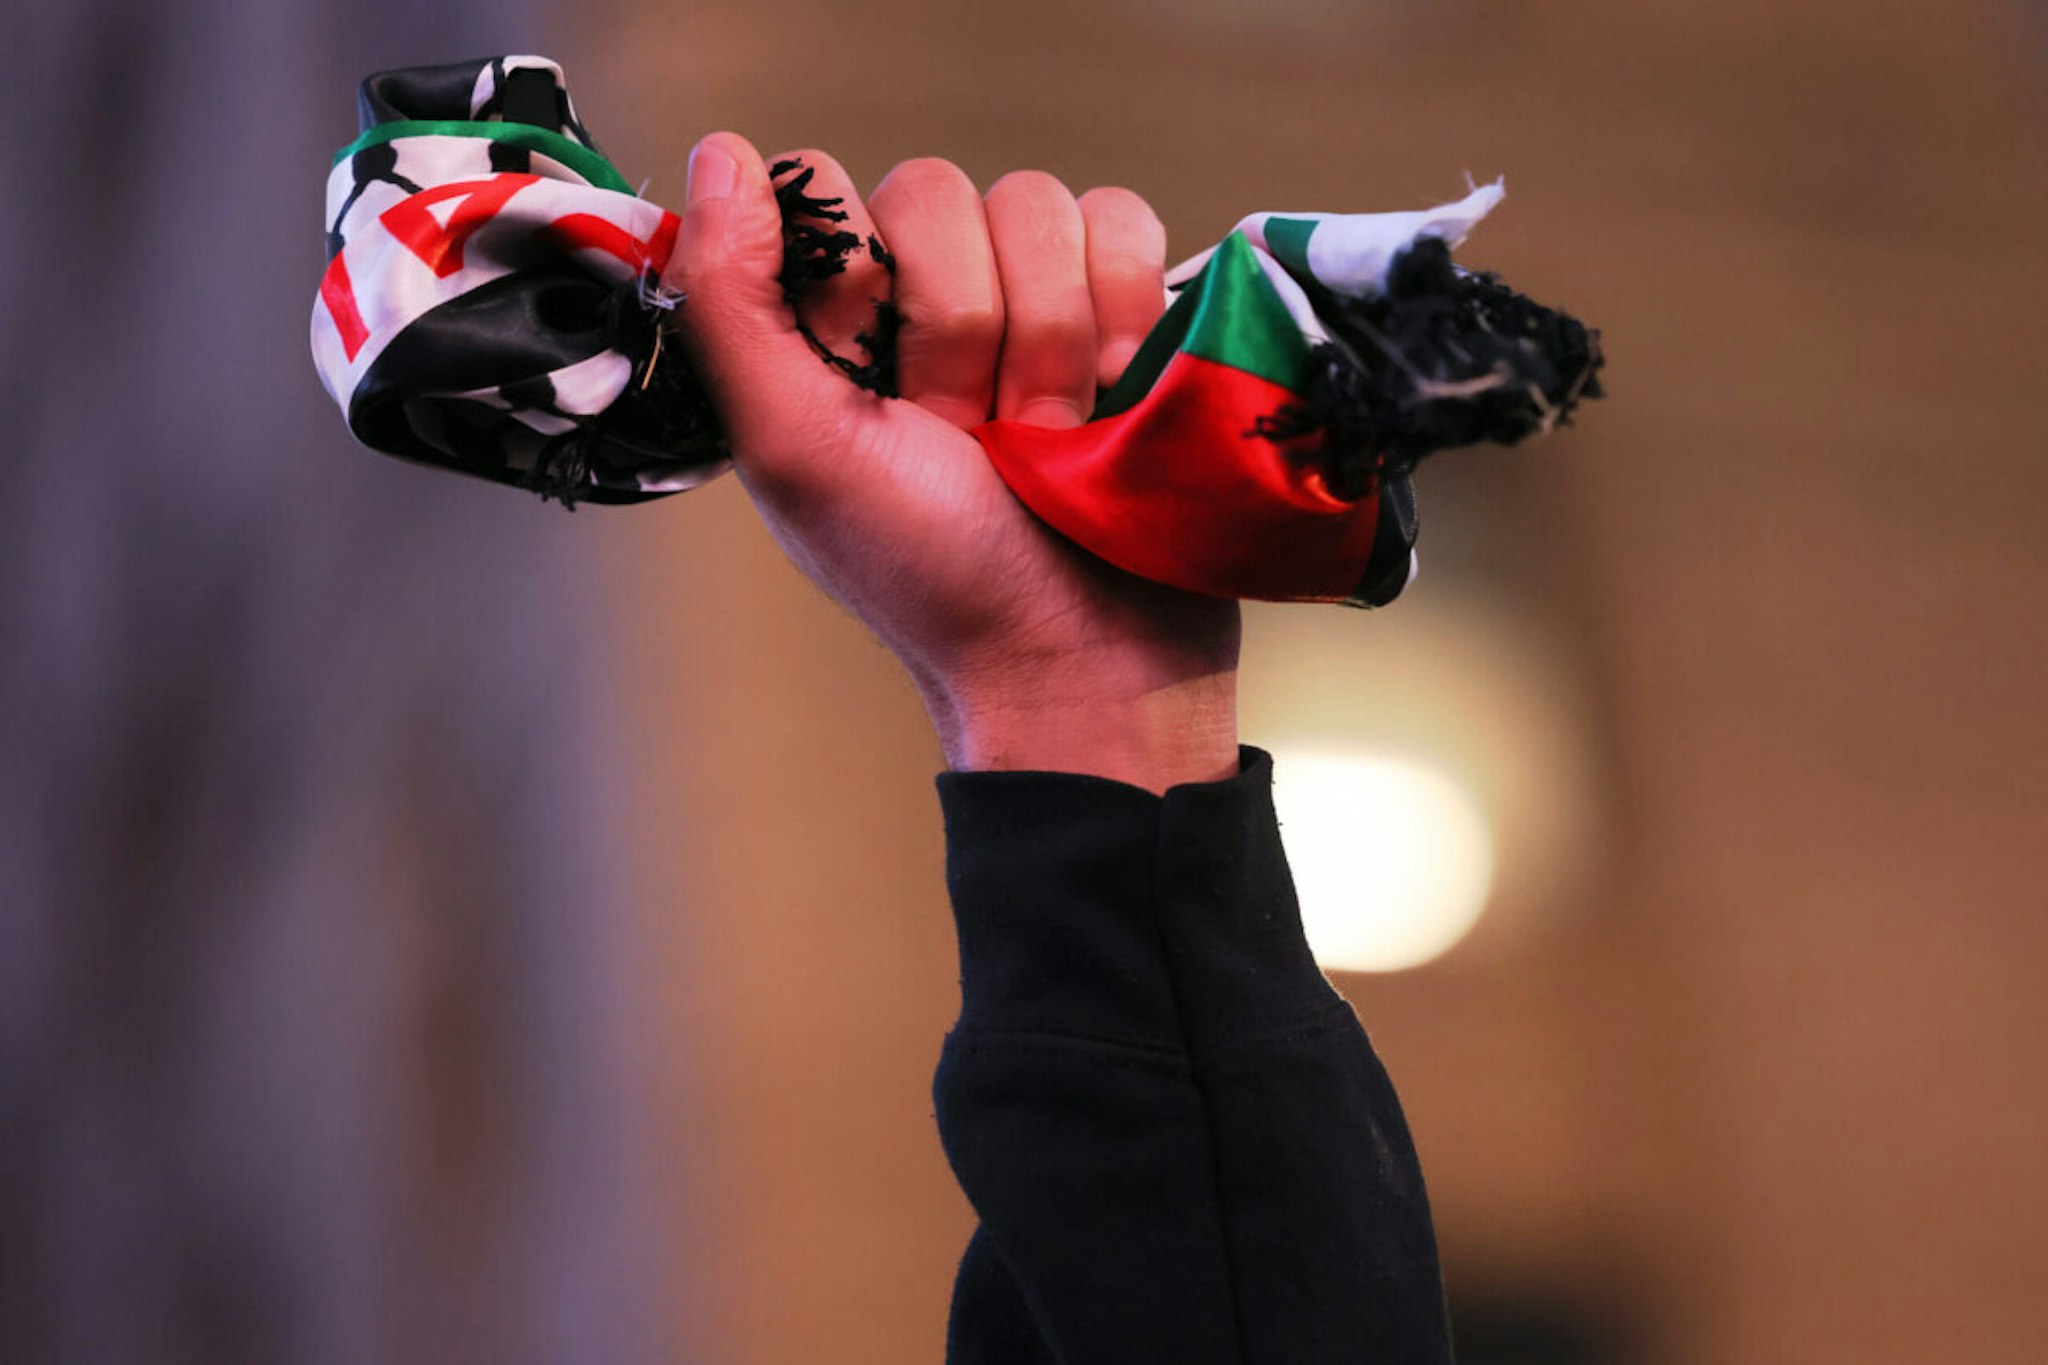 NEW YORK, NEW YORK - DECEMBER 18: A person makes a fist with a Palestinian flag as pro-Palestine activist march and participate in a Global Strike for Gaza on December 18, 2023 in New York City, New York. Activists gathered at Grand Central Station before marching as they continued to demand a ceasefire in Gaza. The protest convened just as the UN Security Council canceled an upcoming vote calling for a cessation of hostilities in Gaza as they try to change the language of the resolution to meet the US objections to the wording of the draft resolution saying they cannot support a “cessation of hostilities," but would agree to a call for a “suspension of hostilities."